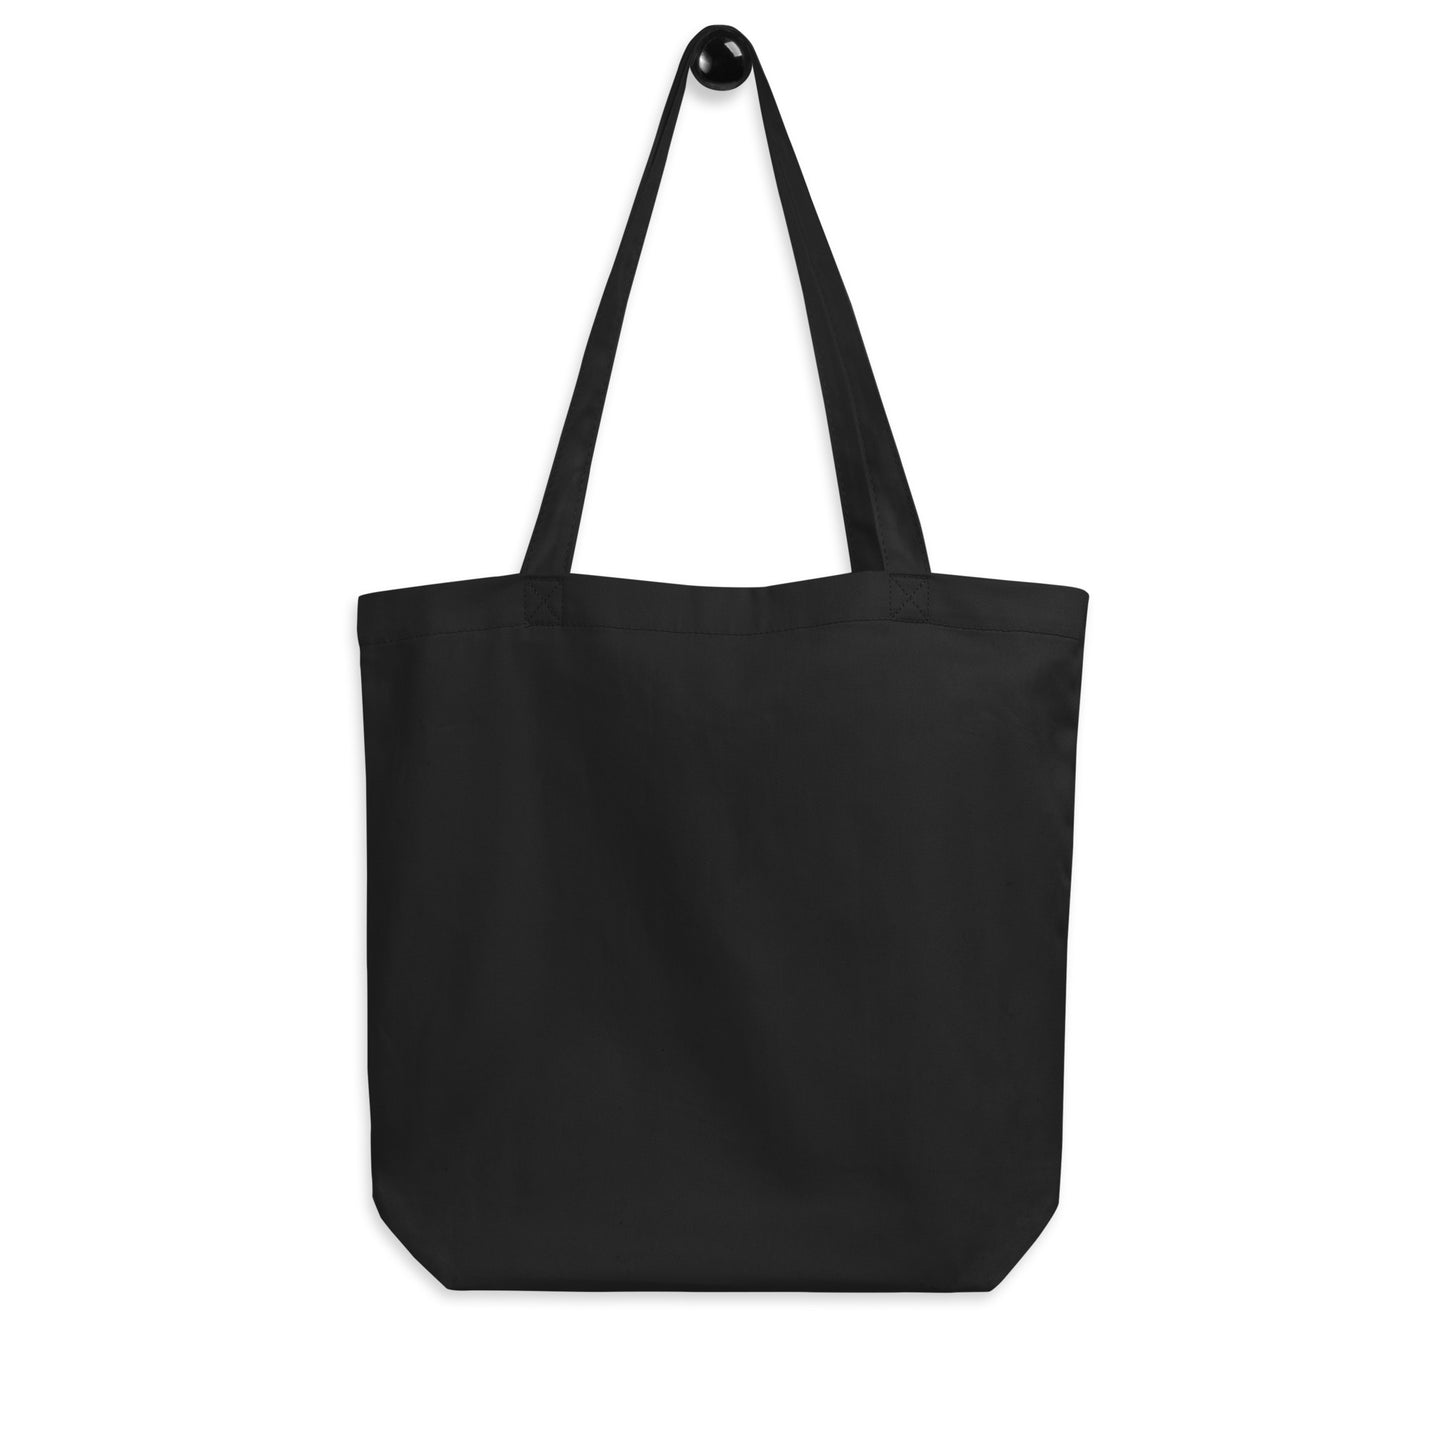 Unique Travel Gift Organic Tote - White Oval • YQM Moncton • YHM Designs - Image 05